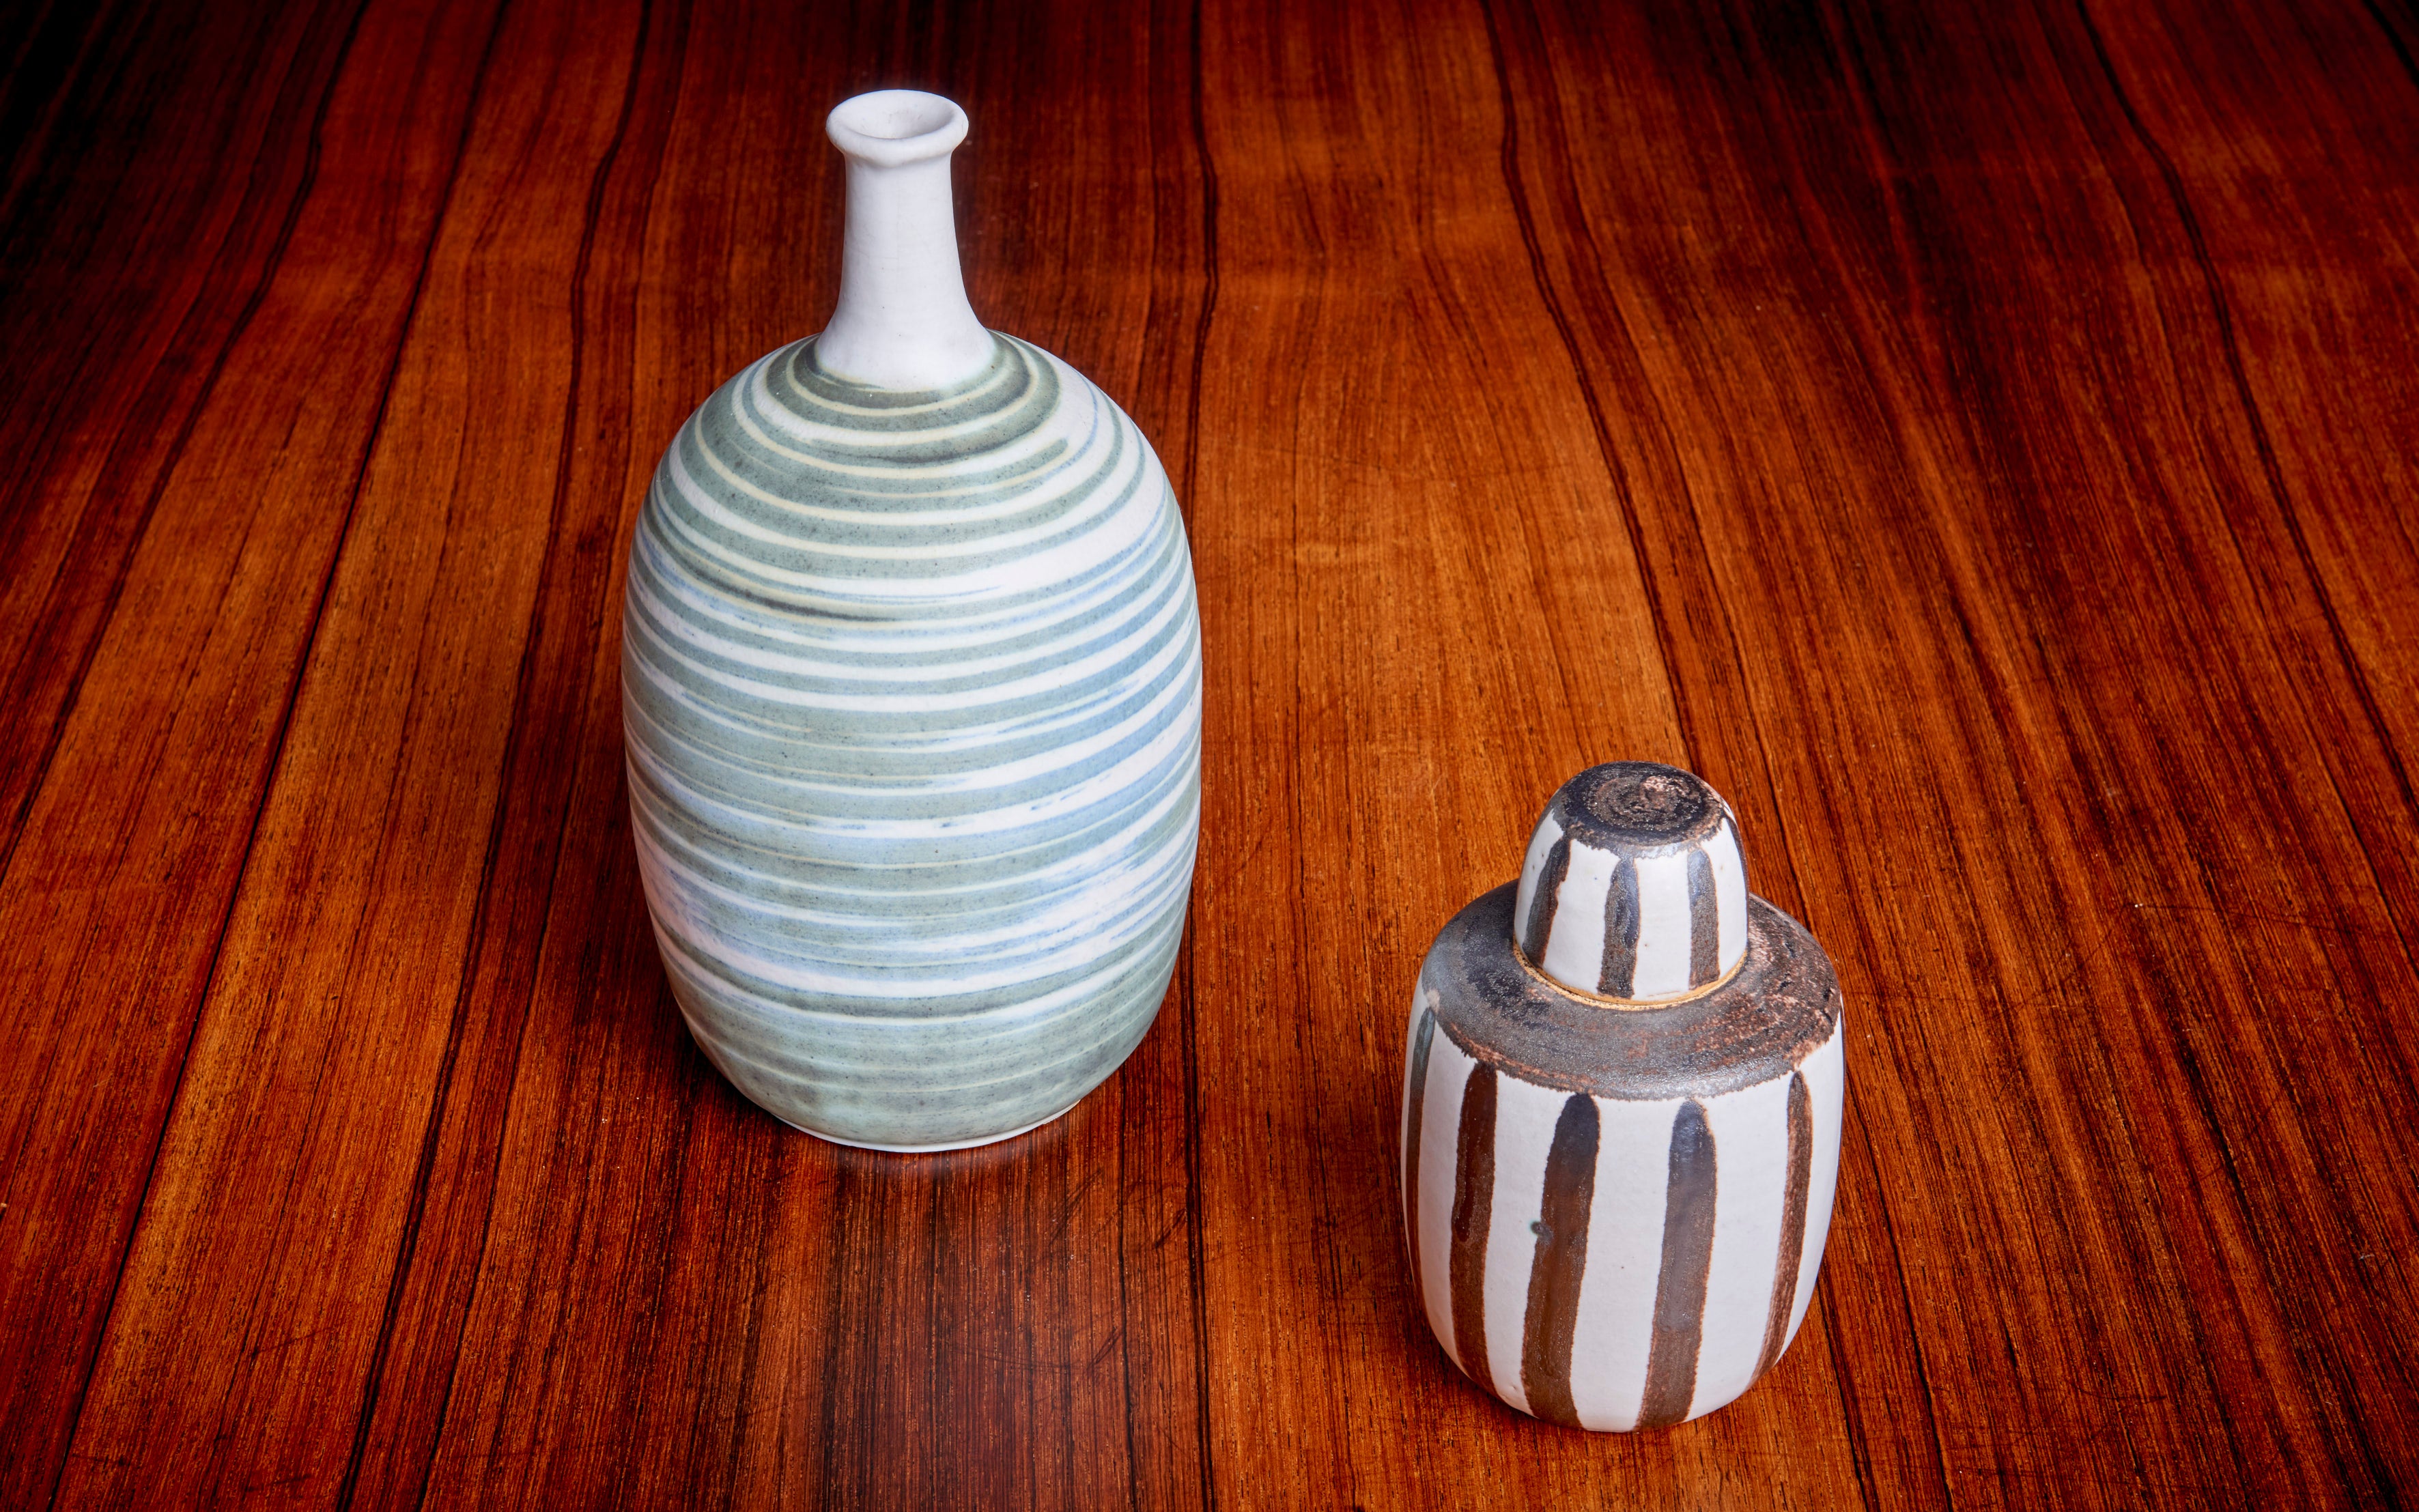 Mint set of of two ceramic vases by Ahsltrom.
Very nice glaziers. The size is the bigger green striped one.

